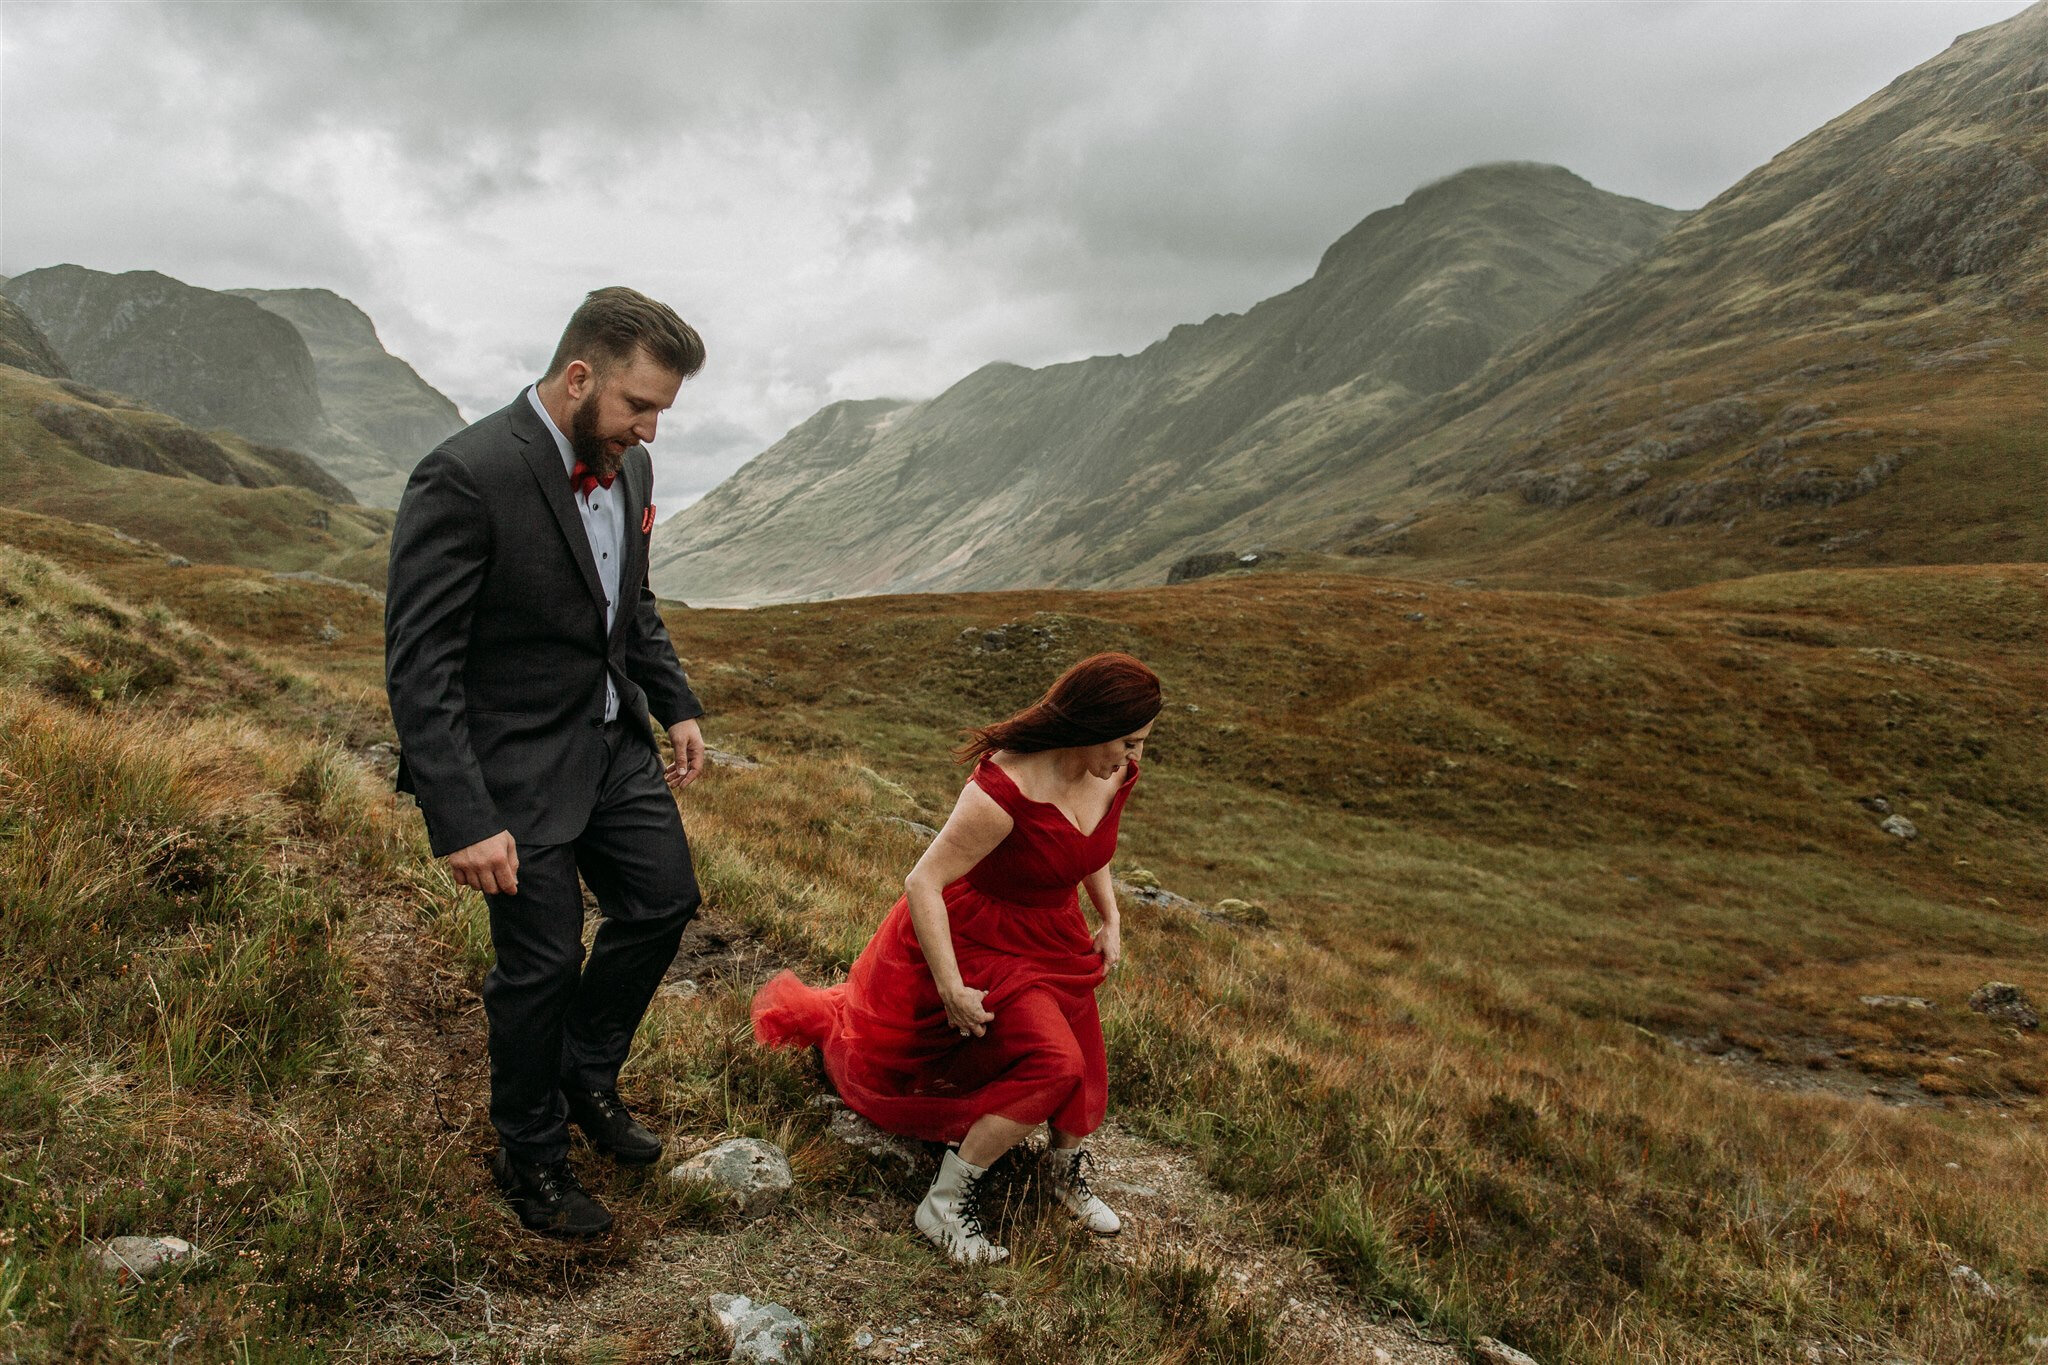 Glen Coe Scotland adventure elopement session. Bride in red dress and her groom walking in the windy Scottish Highlands | Adventure elopement photographer